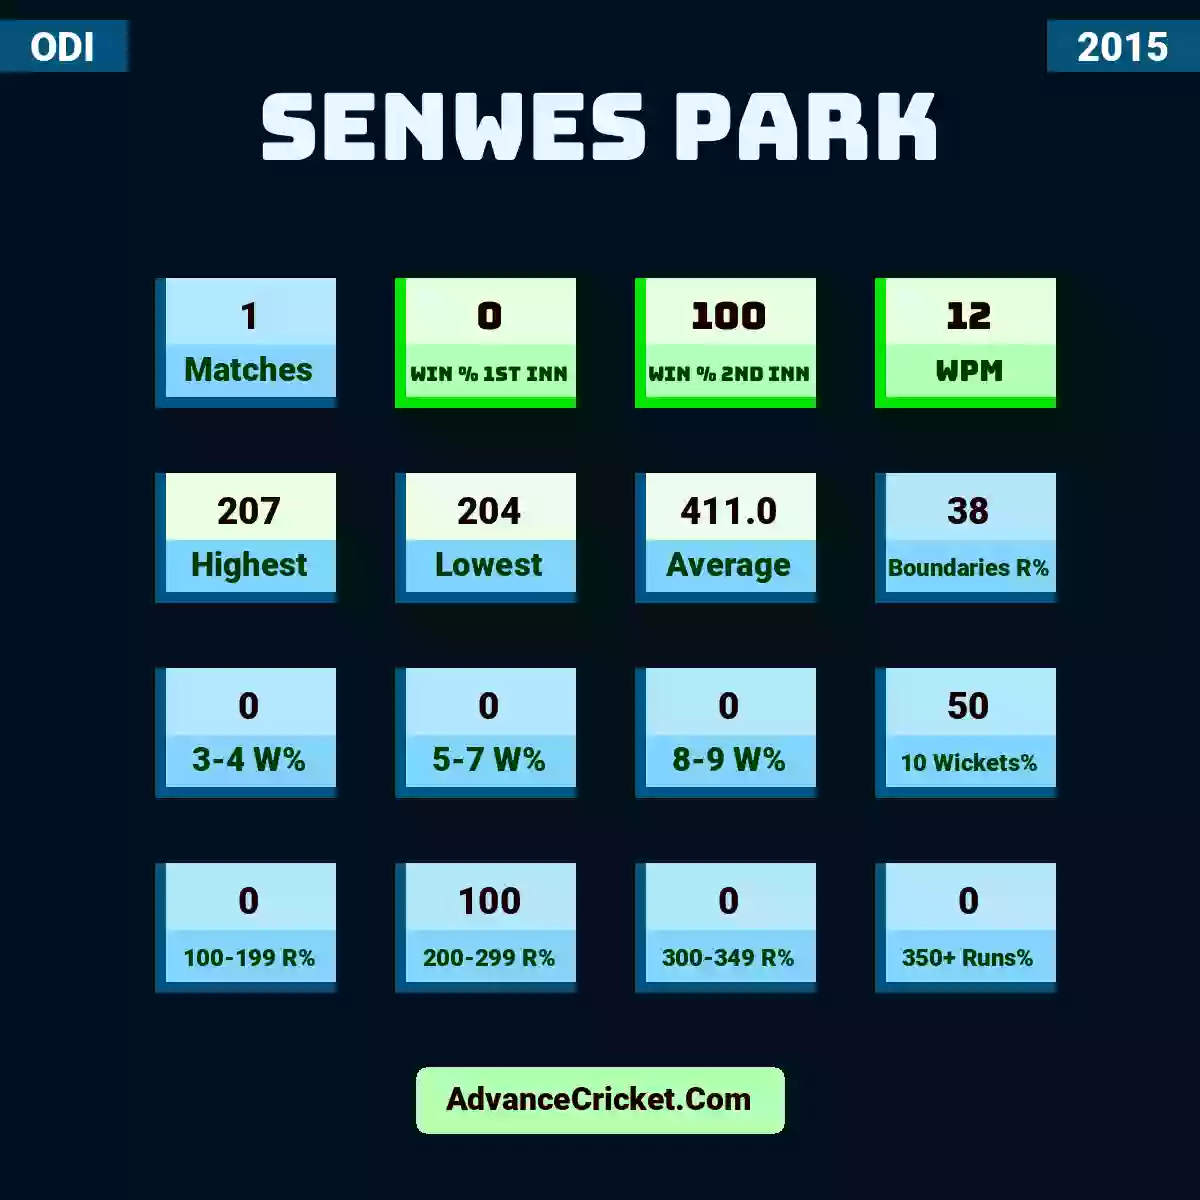 Image showing Senwes Park with Matches: 1, Win % 1st Inn: 0, Win % 2nd Inn: 100, WPM: 12, Highest: 207, Lowest: 204, Average: 411.0, Boundaries R%: 38, 3-4 W%: 0, 5-7 W%: 0, 8-9 W%: 0, 10 Wickets%: 50, 100-199 R%: 0, 200-299 R%: 100, 300-349 R%: 0, 350+ Runs%: 0.